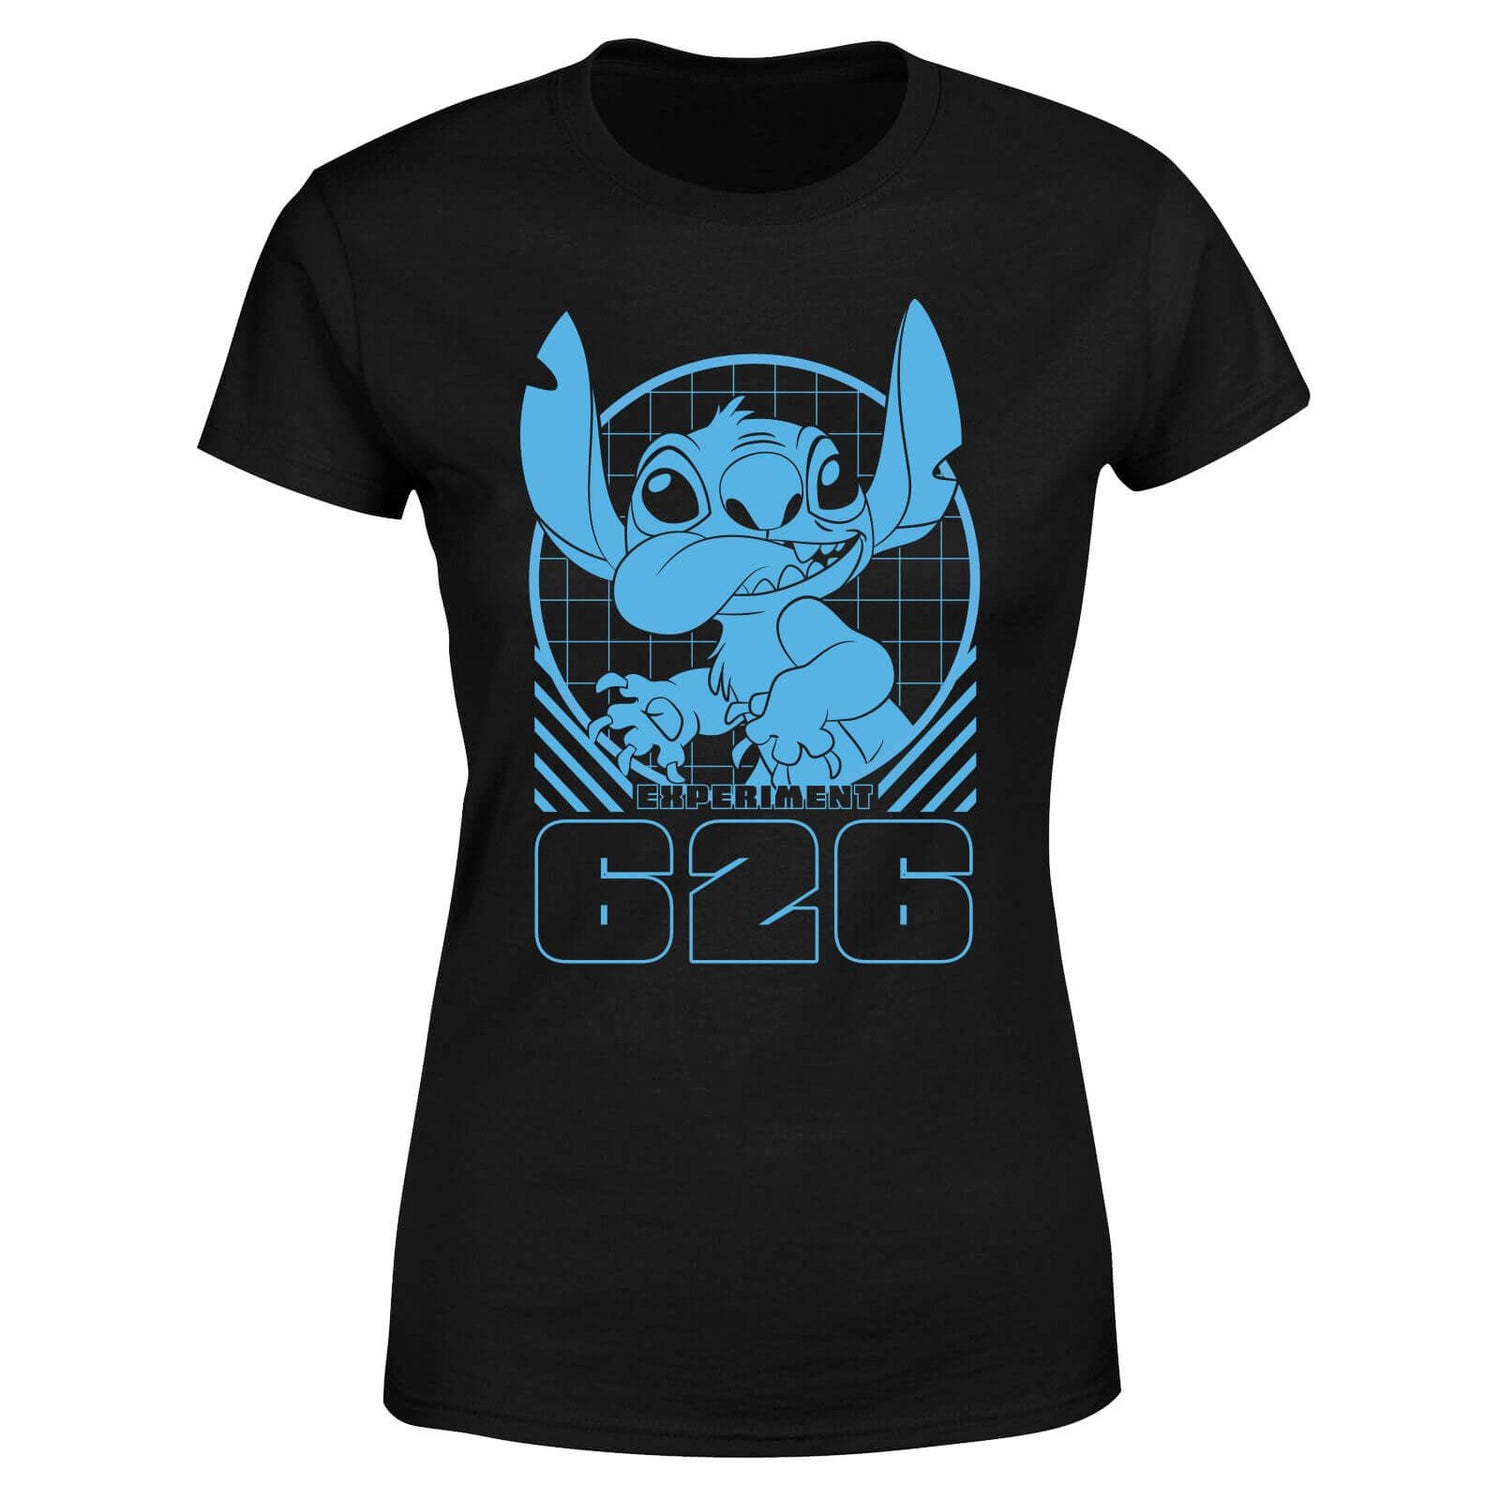 Lilo And Stitch Warning Experiment 626 Women's T-Shirt - Black